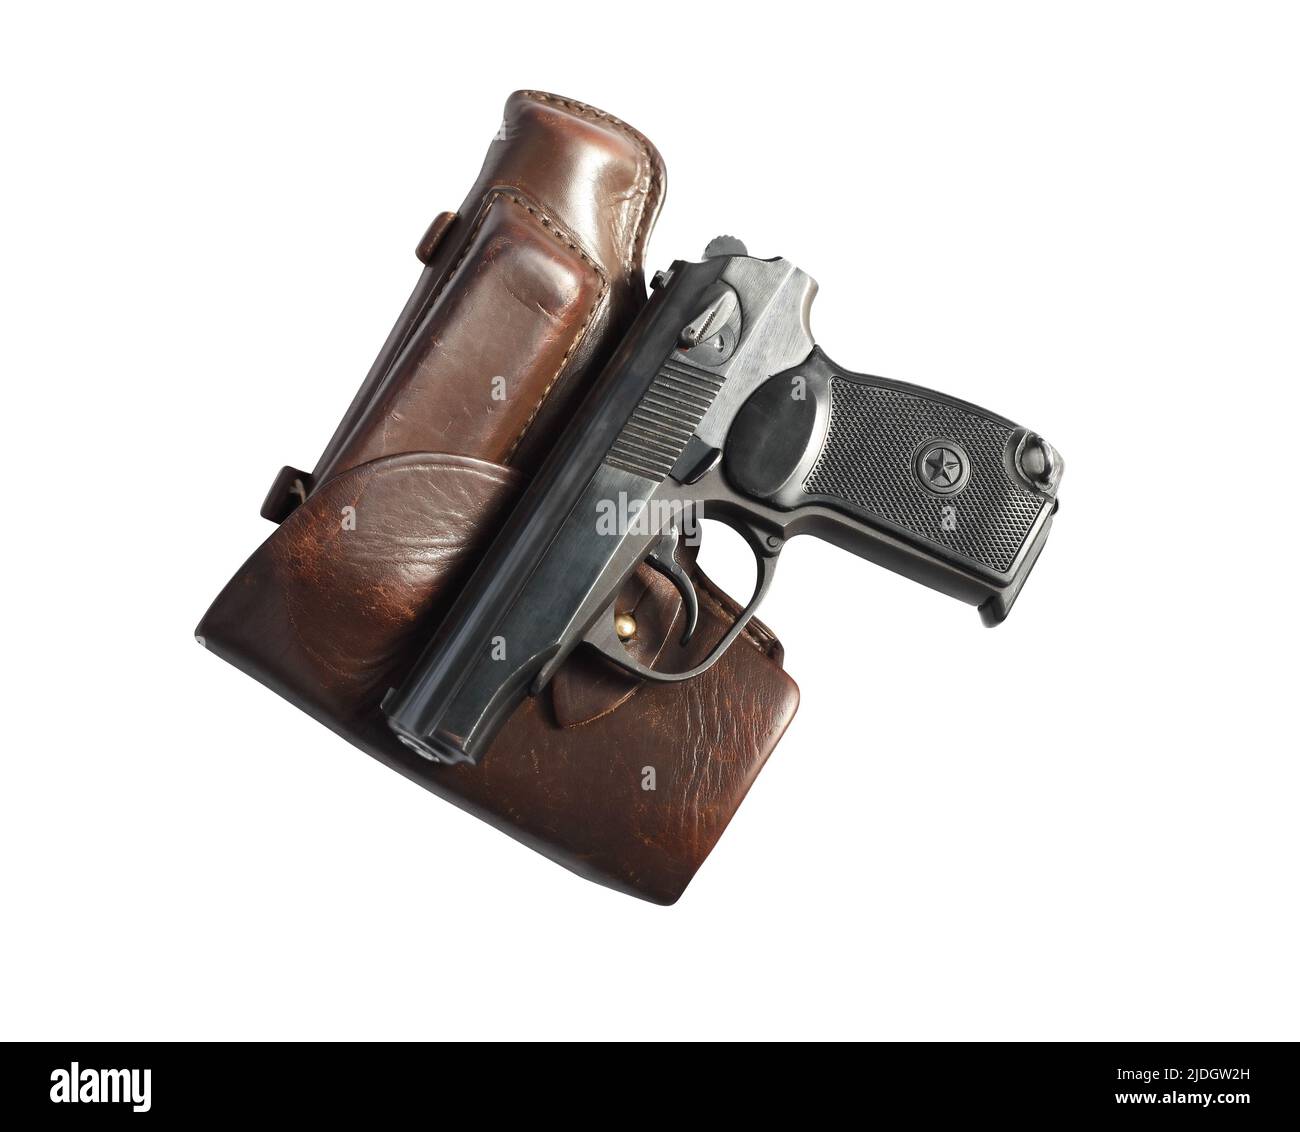 Handgun and holster isolated on white background with clipping path Stock Photo